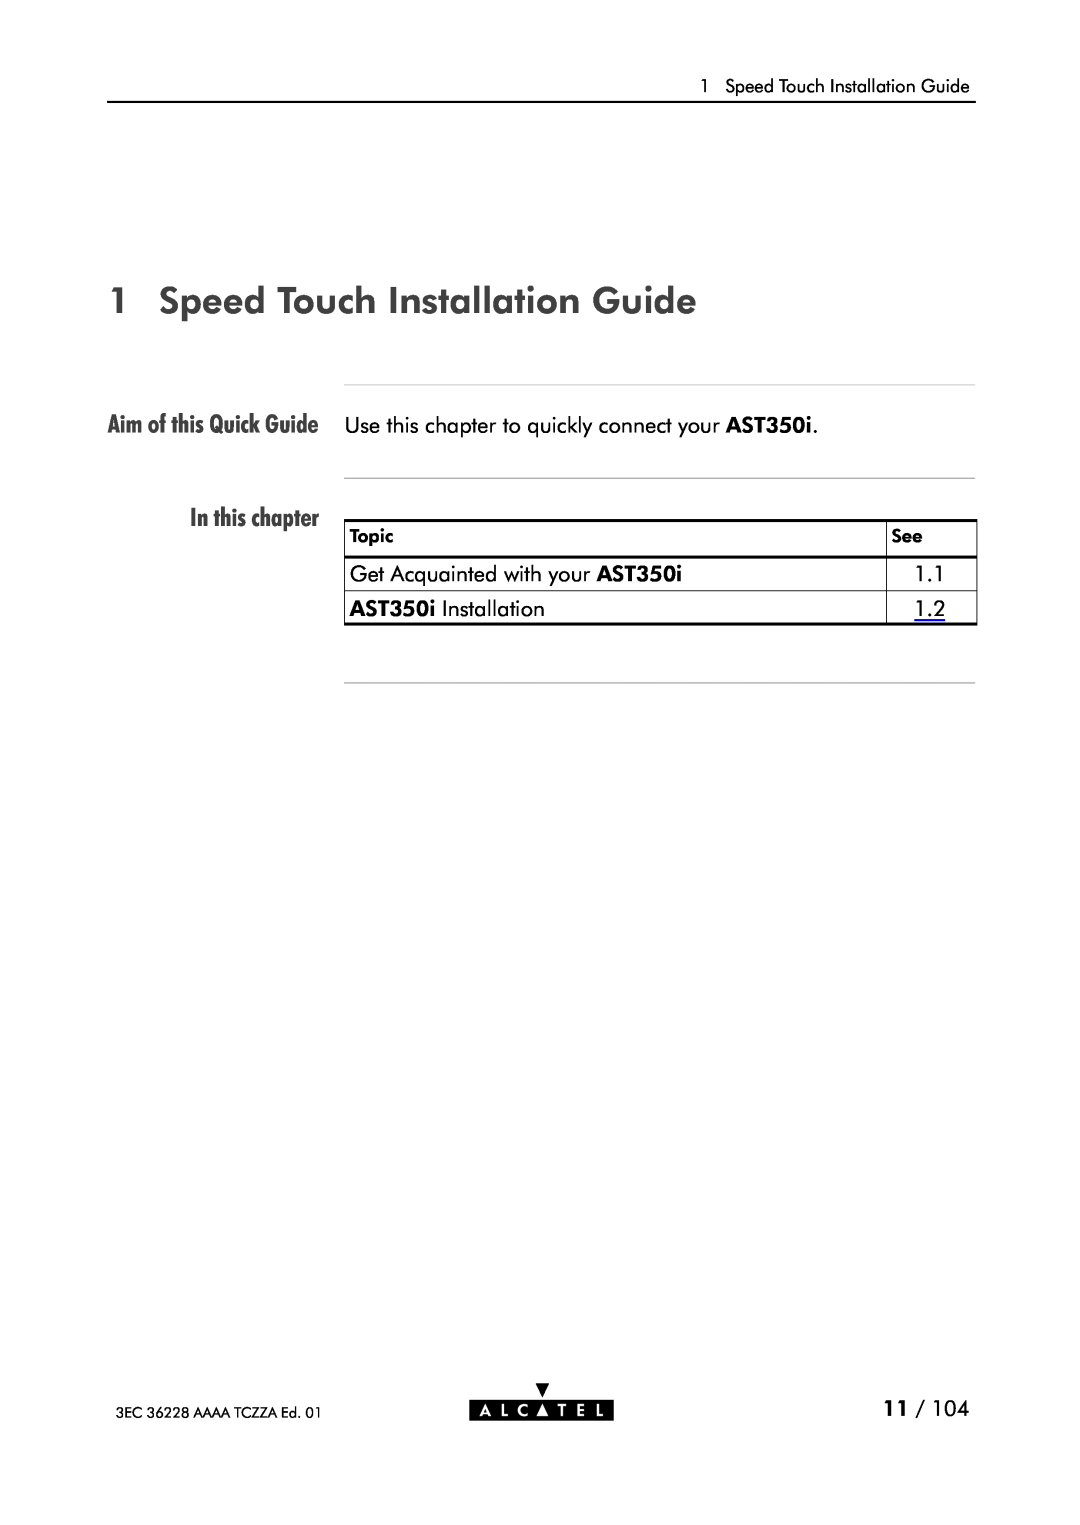 Alcatel Carrier Internetworking Solutions 350I Speed Touch Installation Guide, In this chapter, Aim of this Quick Guide 